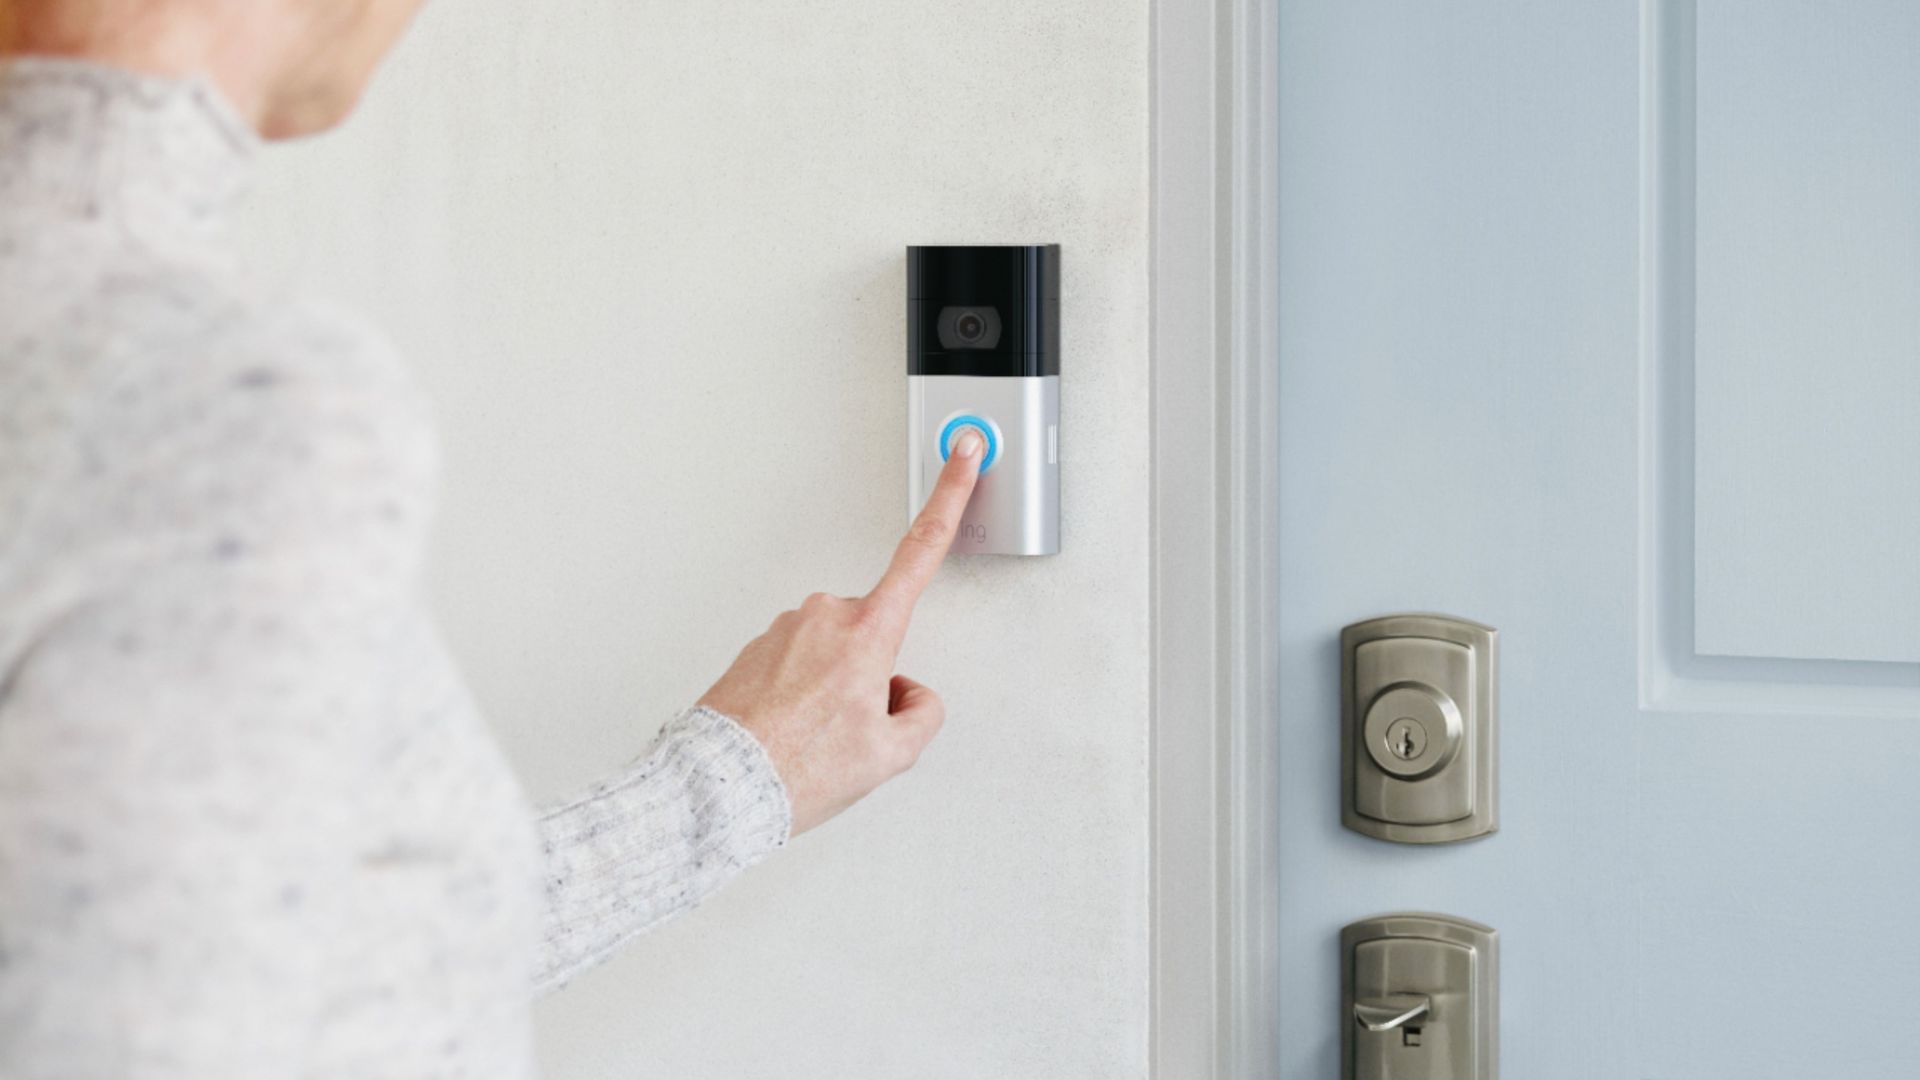 Black Friday Ring deals the best Ring doorbell, security camera offers